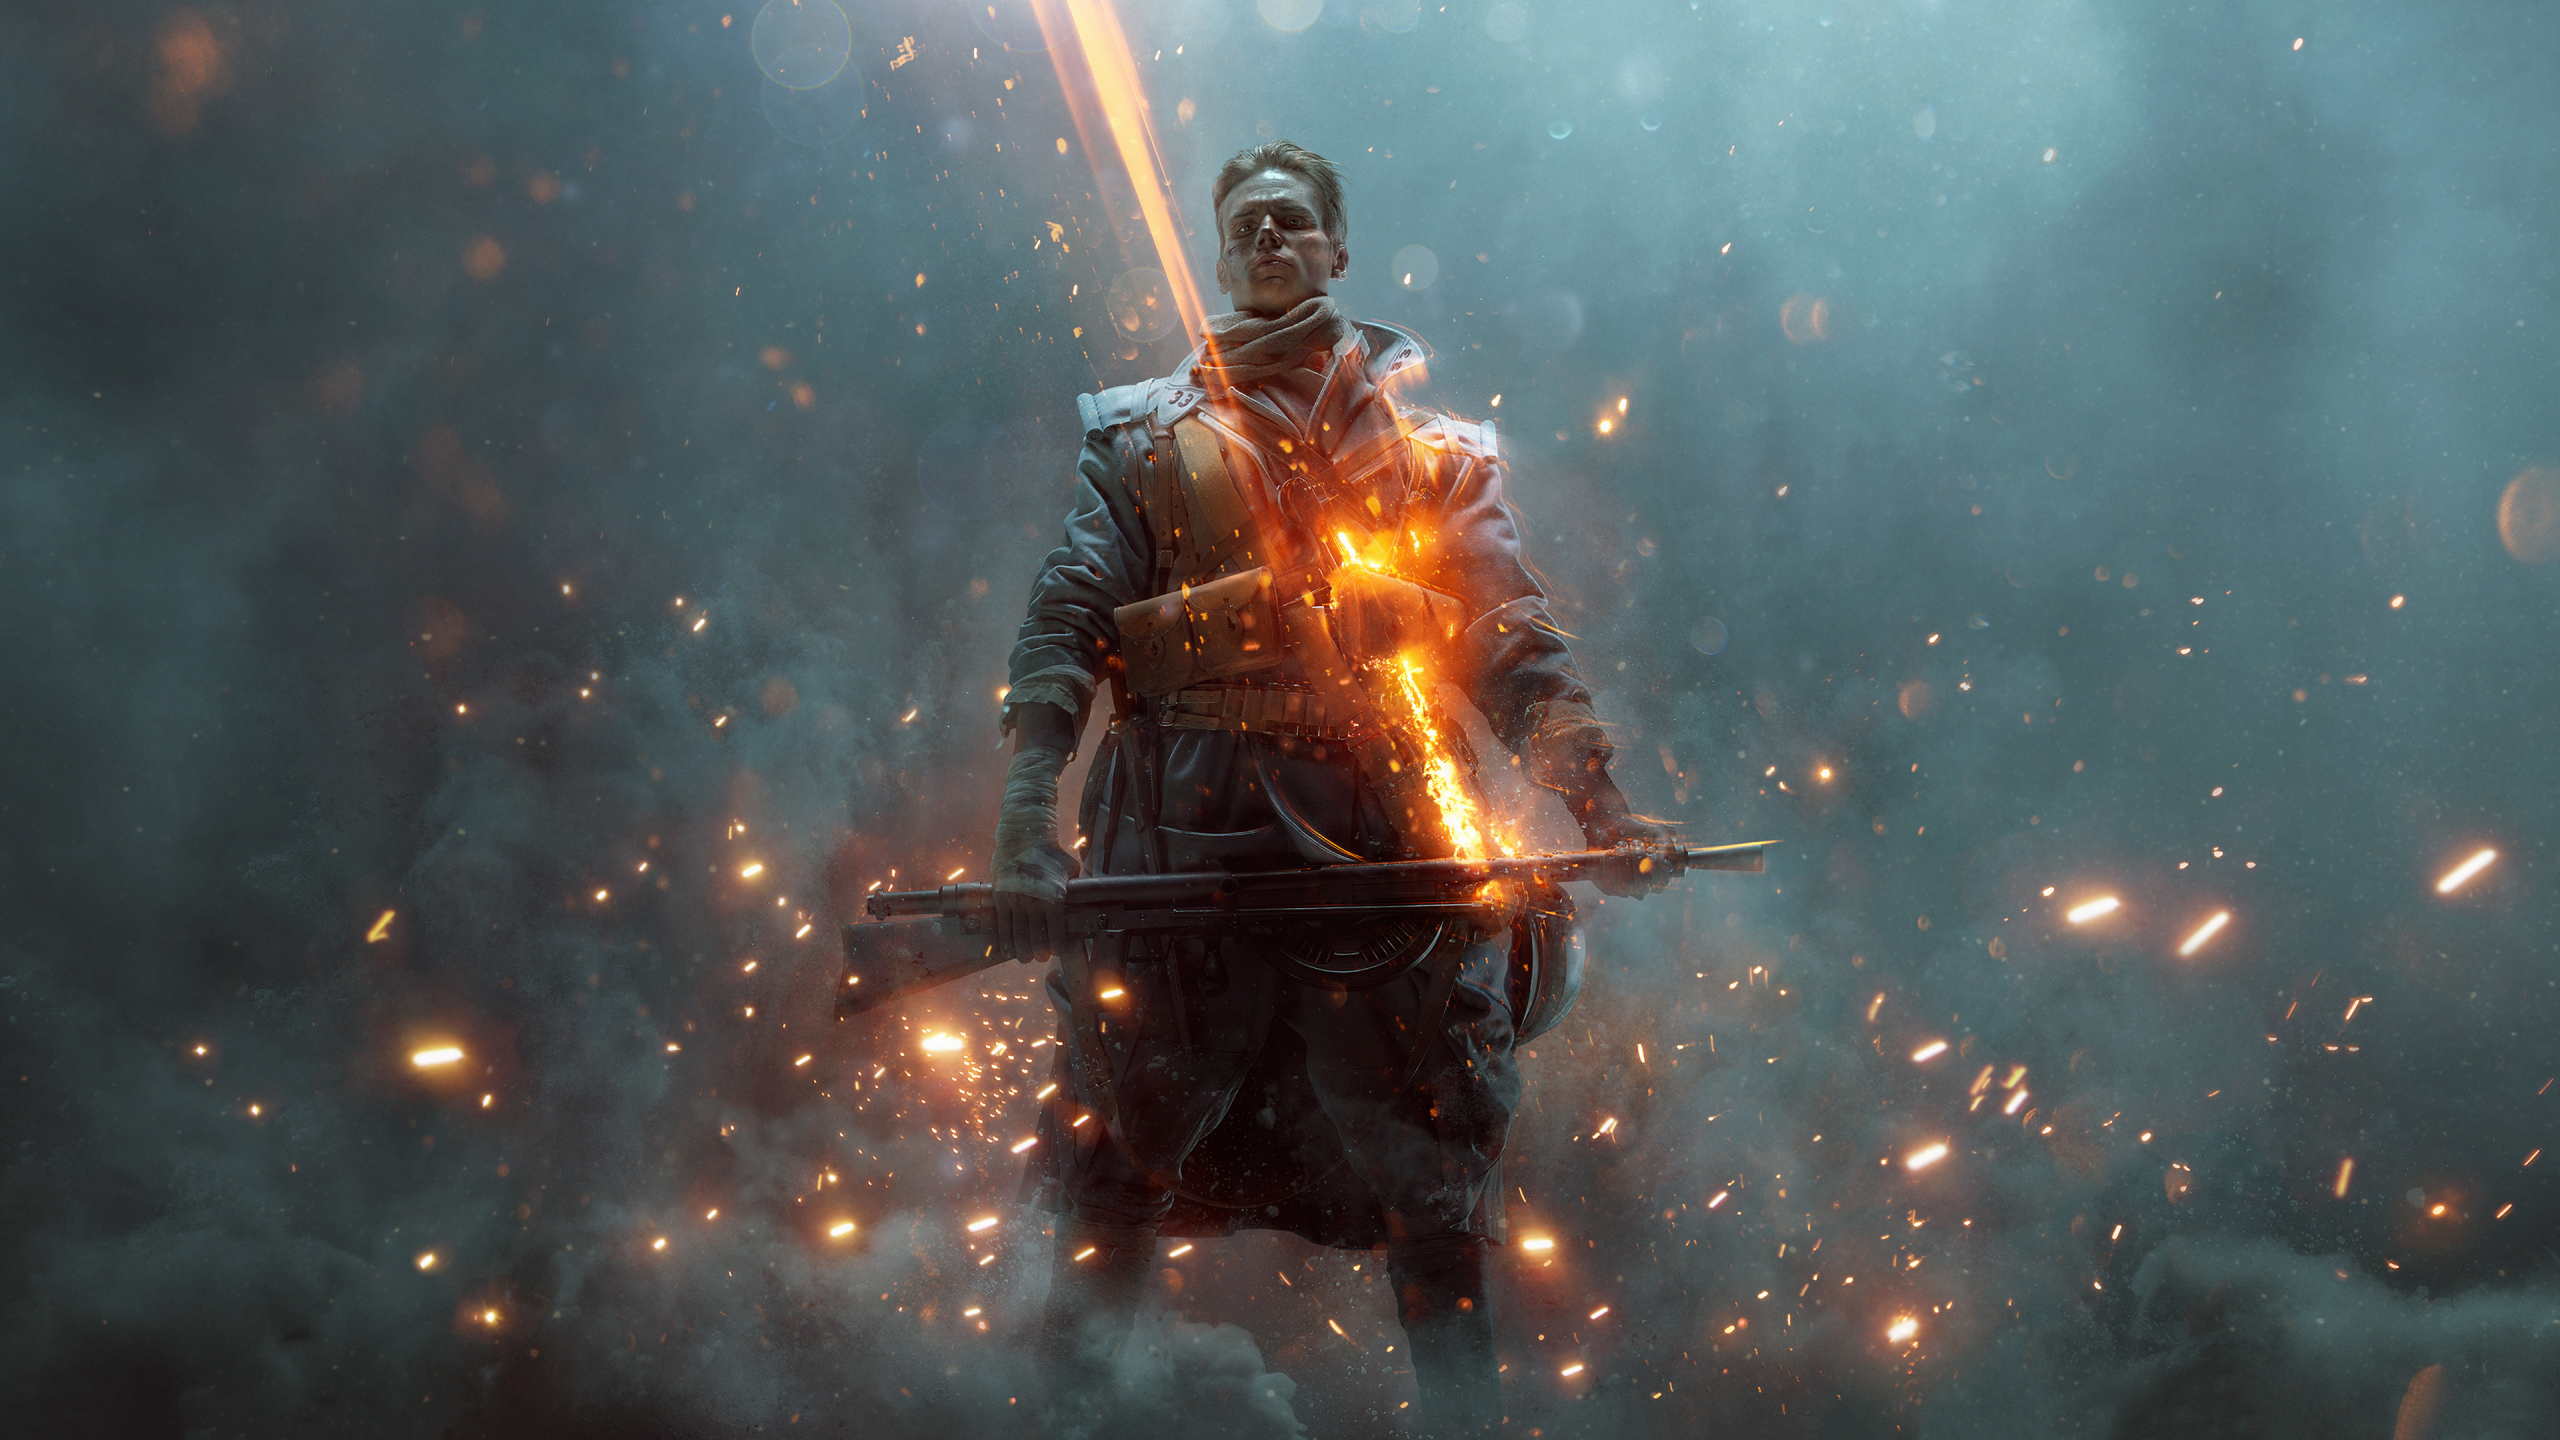 Battlefield 1, They Shall Not Pass, soldier, video game, 2017, 2560x1440 wallpaper